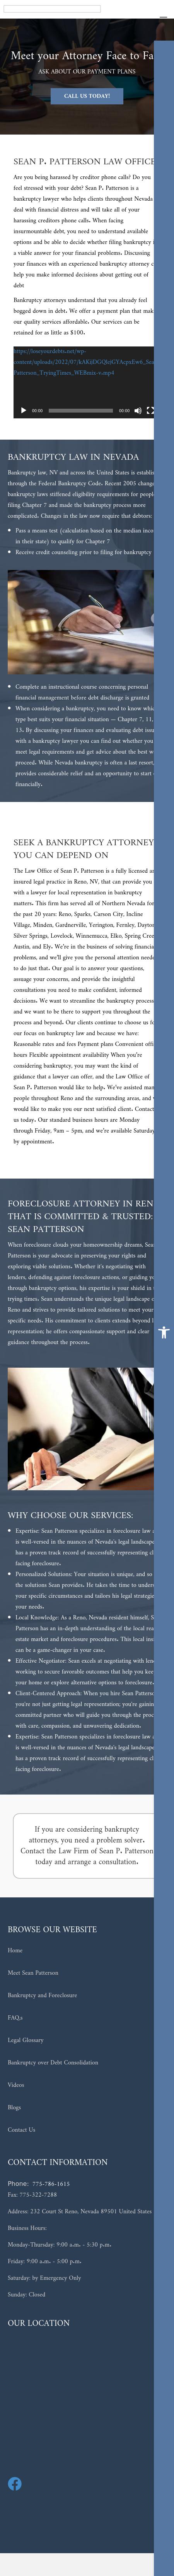 Patterson Sean P. Law Offices - Reno NV Lawyers